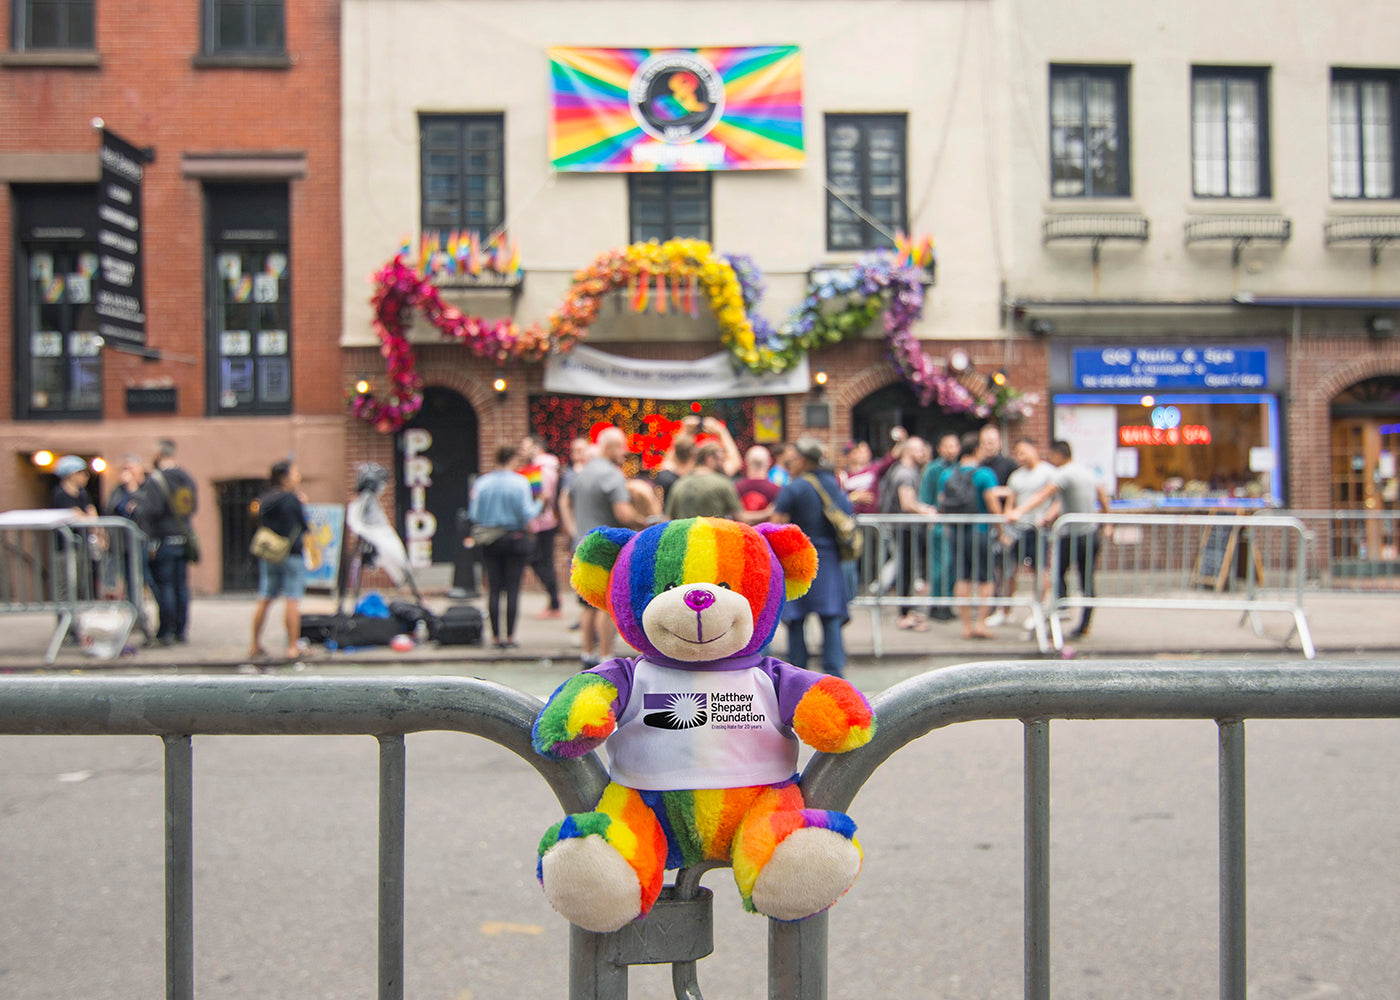 Bear Buggy®'s Totally Pride Teddy photographed for Pride in front of Stonewall, the birthplace of the modern LGBTQ civil rights movement.